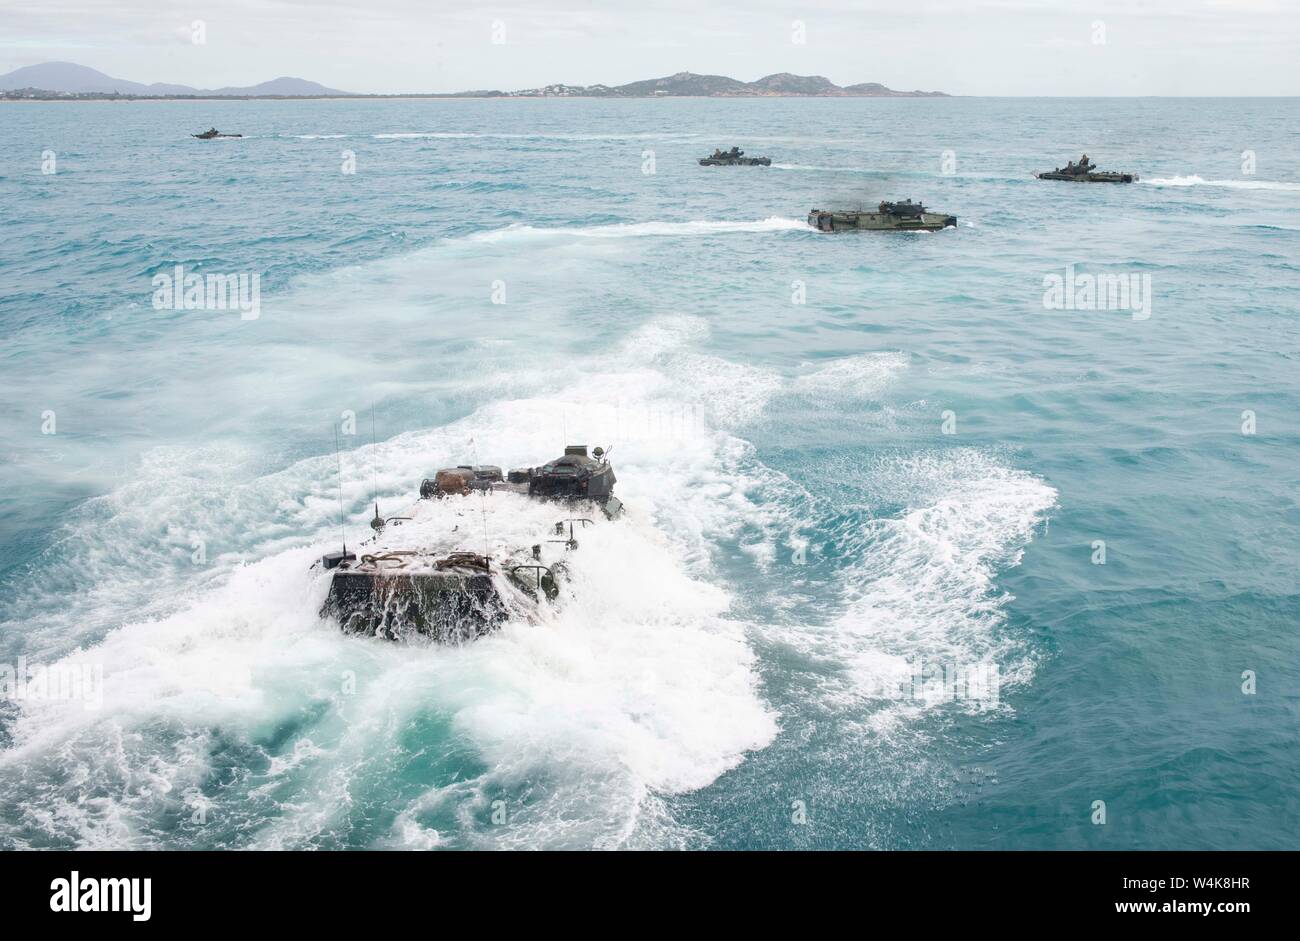 190722-N-DX072-1132 BOWEN, Australia (July 22, 2019) Assault amphibious vehicles (AAV), assigned to the 31st Marine Expeditionary Unit (MEU), depart the well deck of the amphibious transport dock ship USS Green Bay (LPD 20). Green Bay, part of the Wasp Expeditionary Strike Group, with embarked 31st MEU, is currently participating in Talisman Sabre 2019 off the coast of Northern Australia. A bilateral, biennial event, Talisman Sabre is designed to improve U.S. and Australian combat training, readiness and interoperability through realistic, relevant training necessary to maintain regional secur Stock Photo